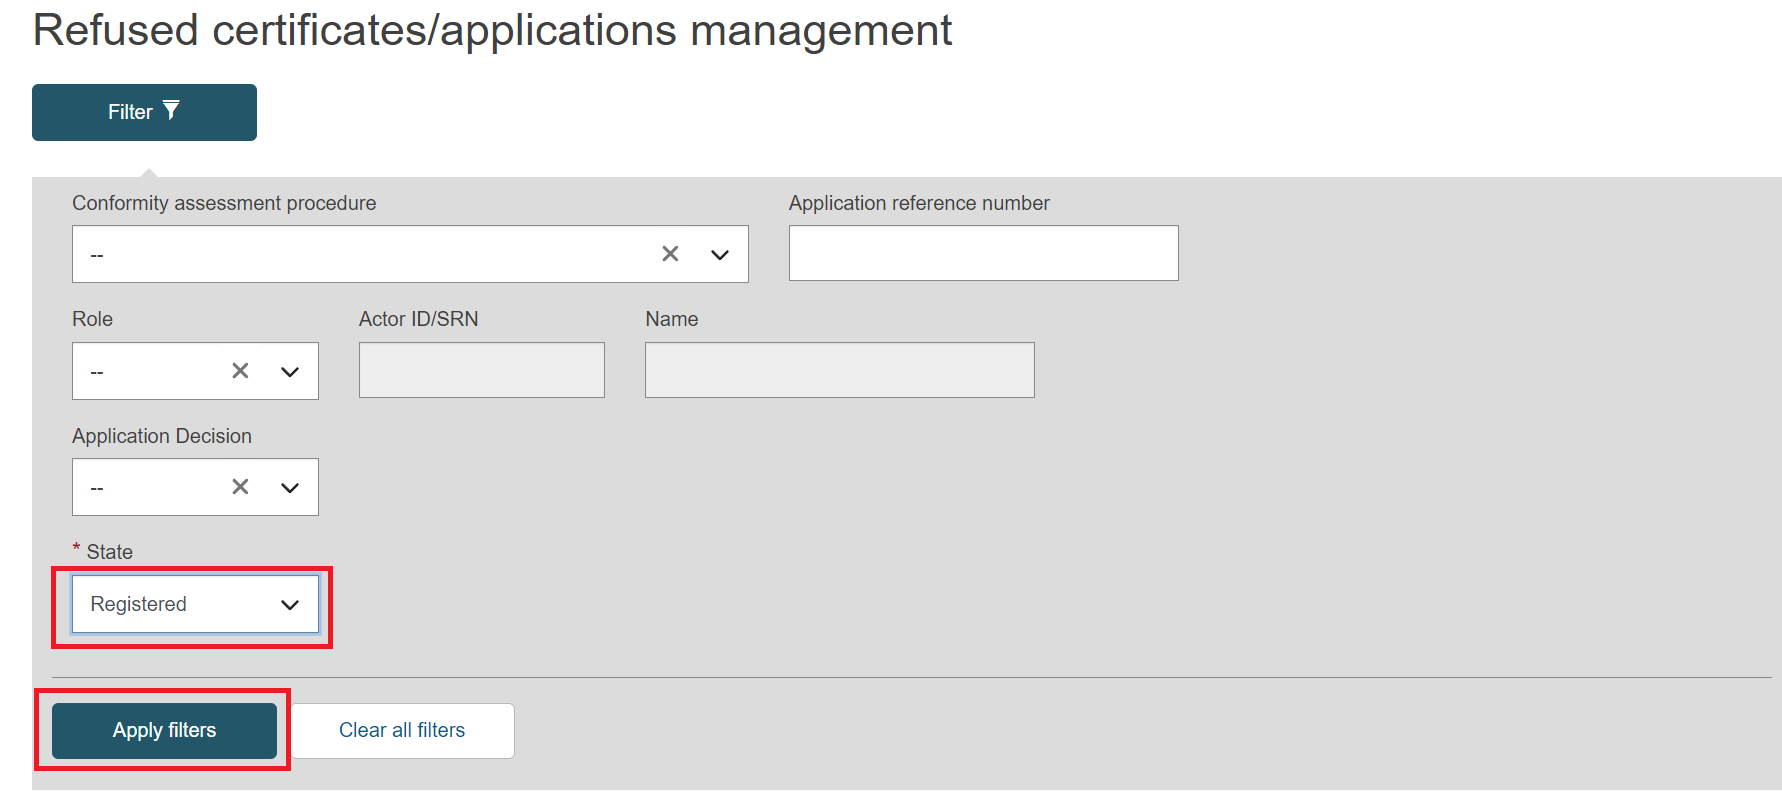 EUDAMED refused certificates applications management page with registered state selected